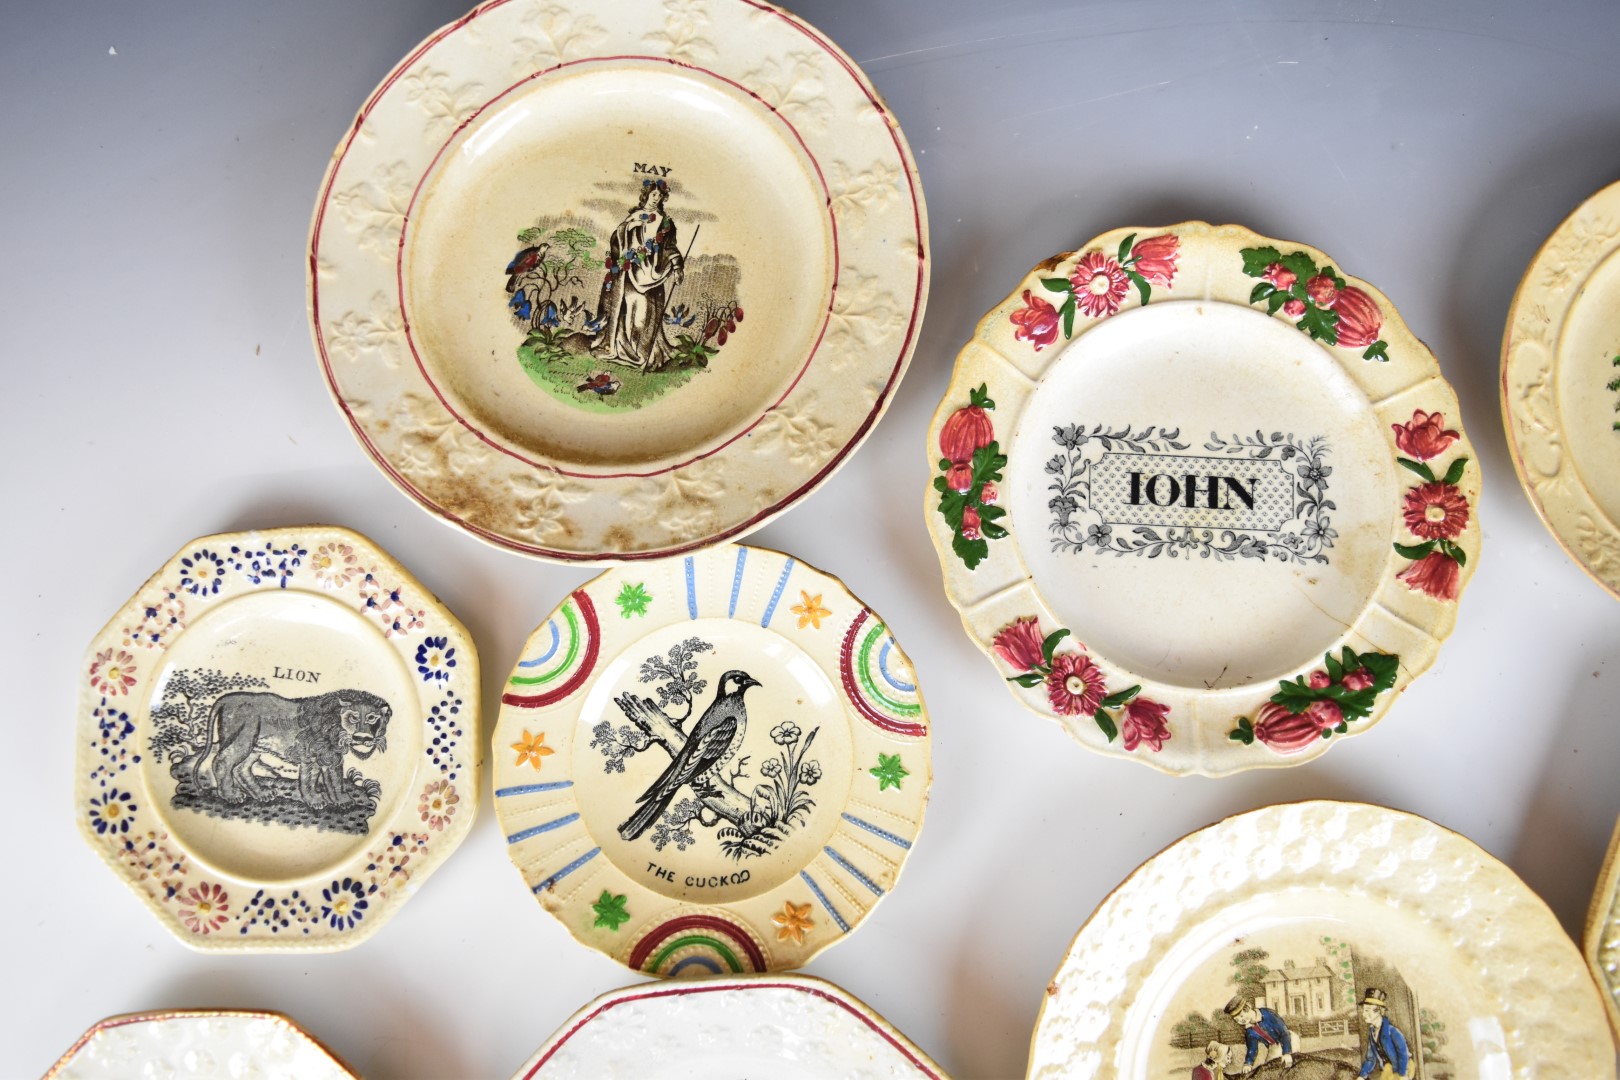 19thC nursery ware including The Cuckoo, Donkey and Horse, 'Listen To The Voice of Love', Lion, - Image 3 of 12